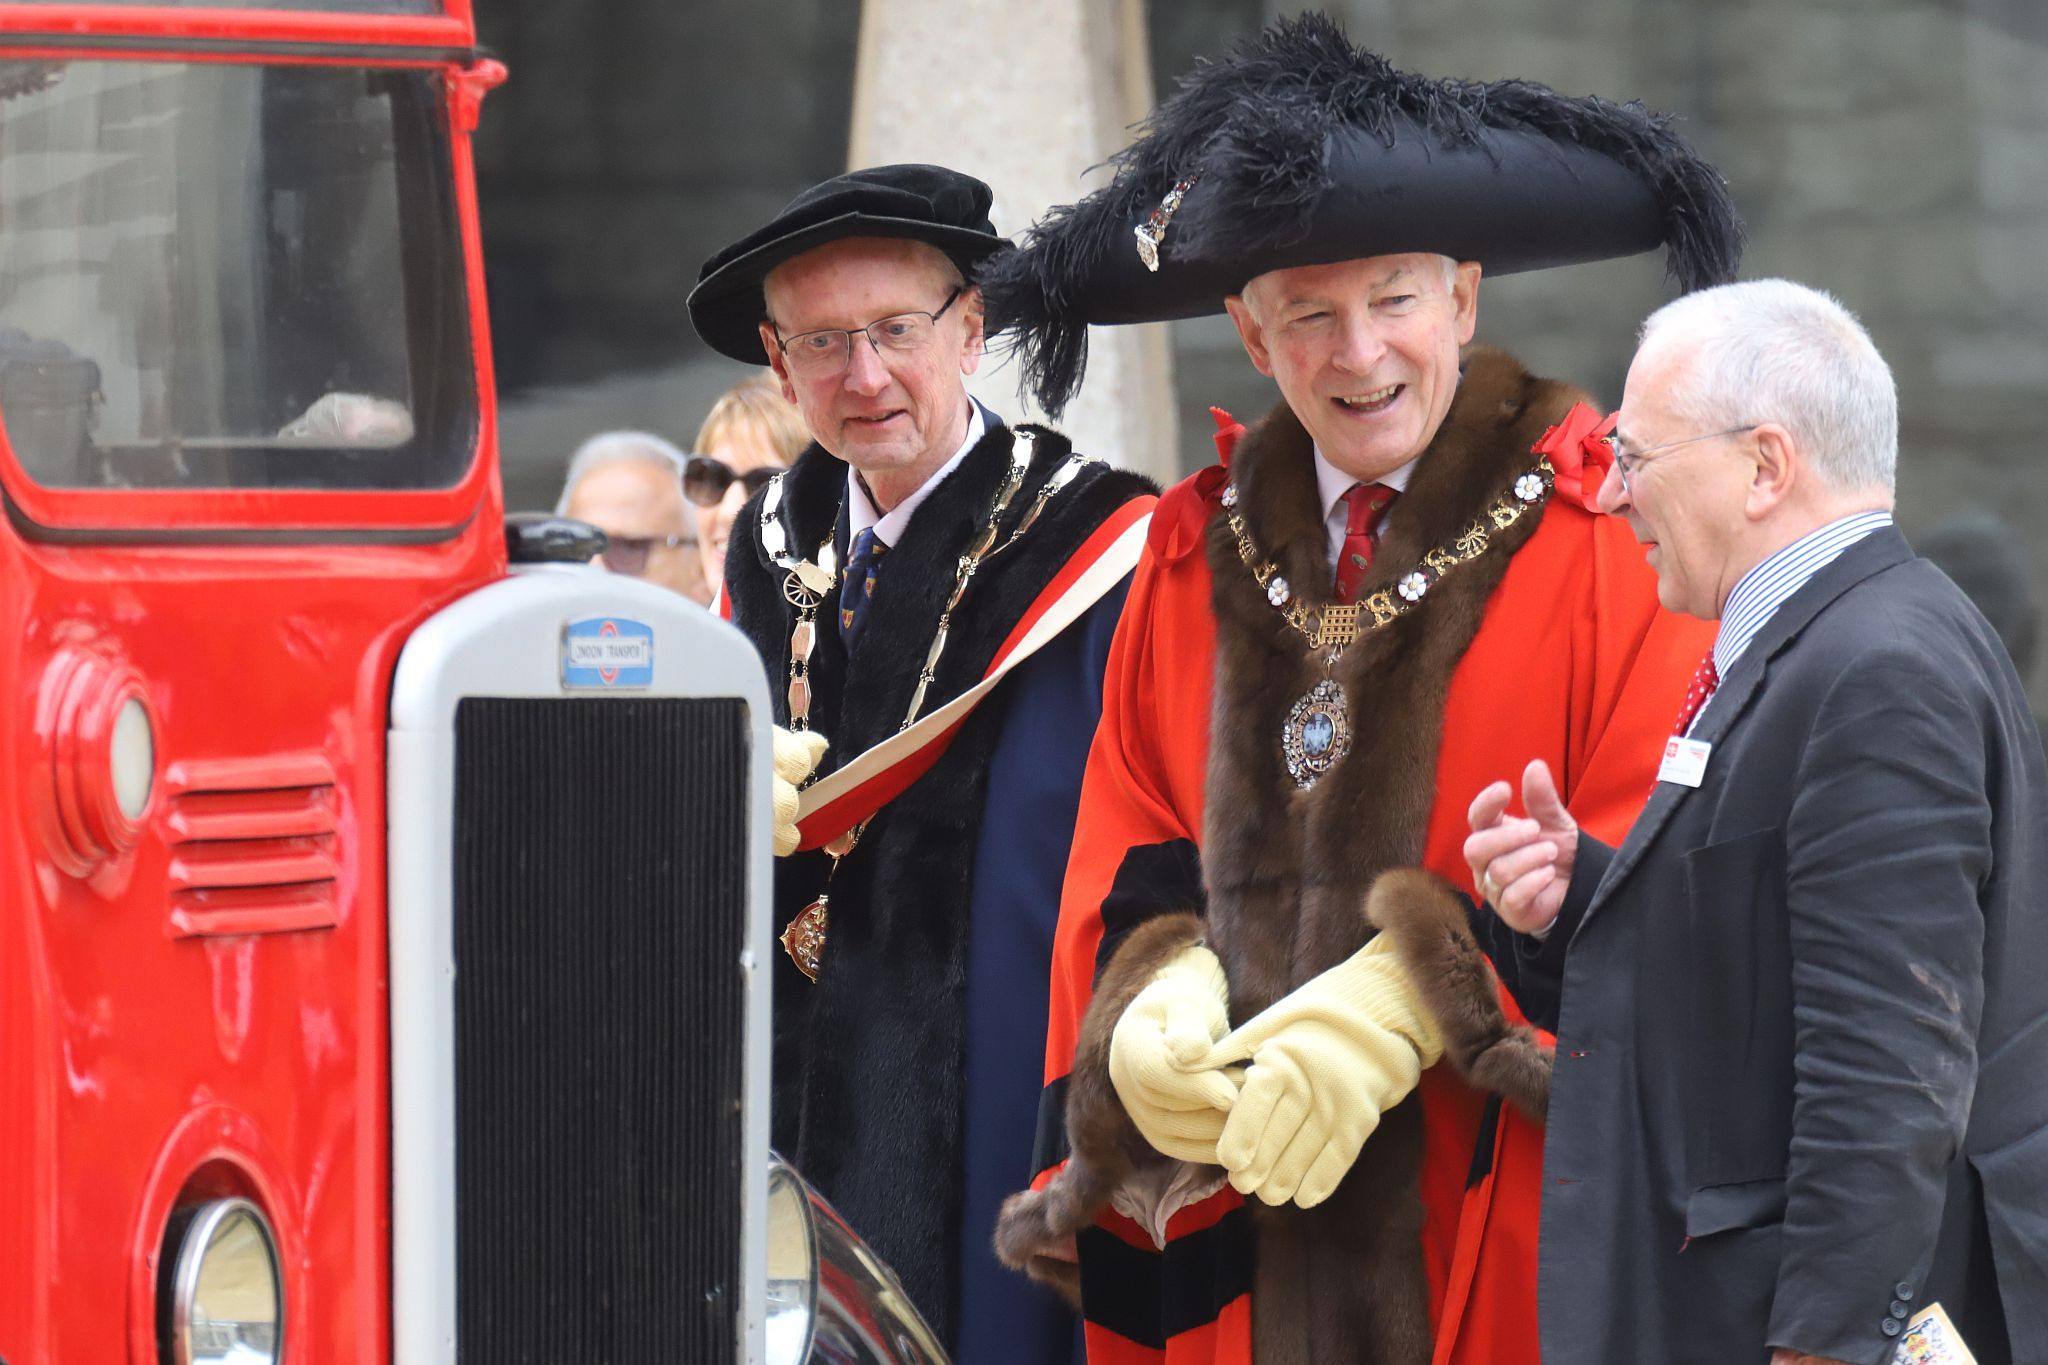 Lord Mayor (Nicholas Lyons) and the Master Carman (Andrew Turner) chat to an exhibitor. Leyland Titan 1950 LLU957. City of London 2023 Cart Marking in Guildhall Yard on 22-Jul-2023. Hosted by the Worshipful Company of Carmen with the Lord Mayor of the City of London in attendance. Wooden plates on the vehicles are branded with hot irons to allow them to ply for trade in the Square Mile. Another of the City Livery Company's annual ceremonies.